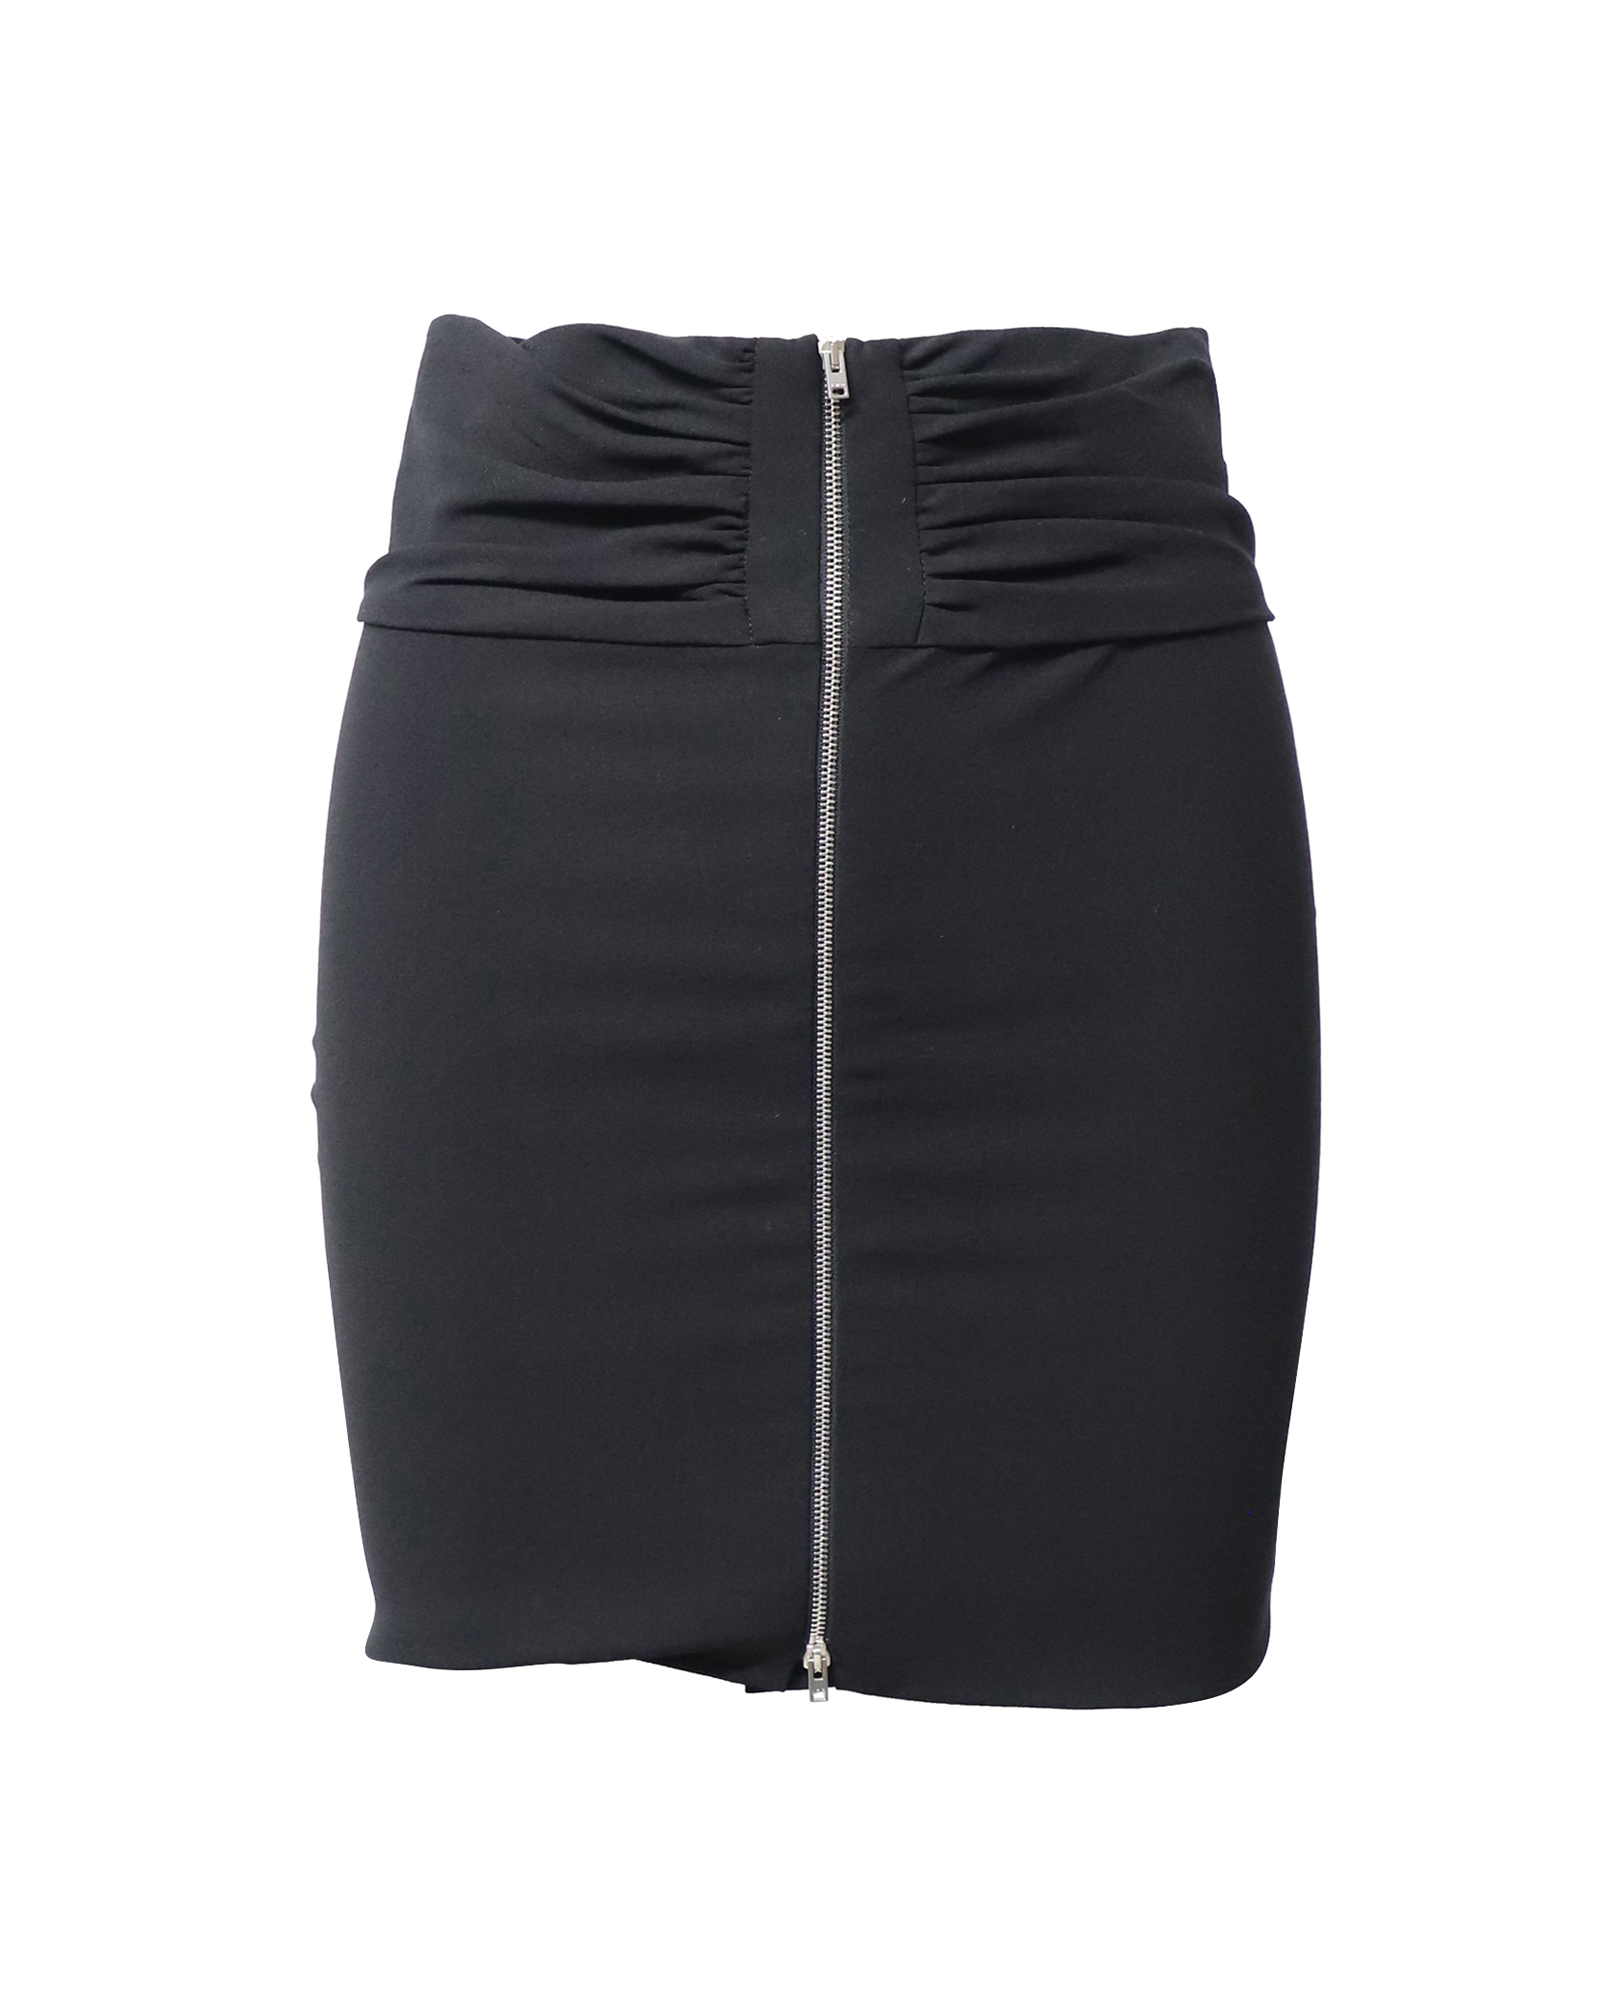 Gathered Pencil Skirt with Exposed Zipper in Black Acetate